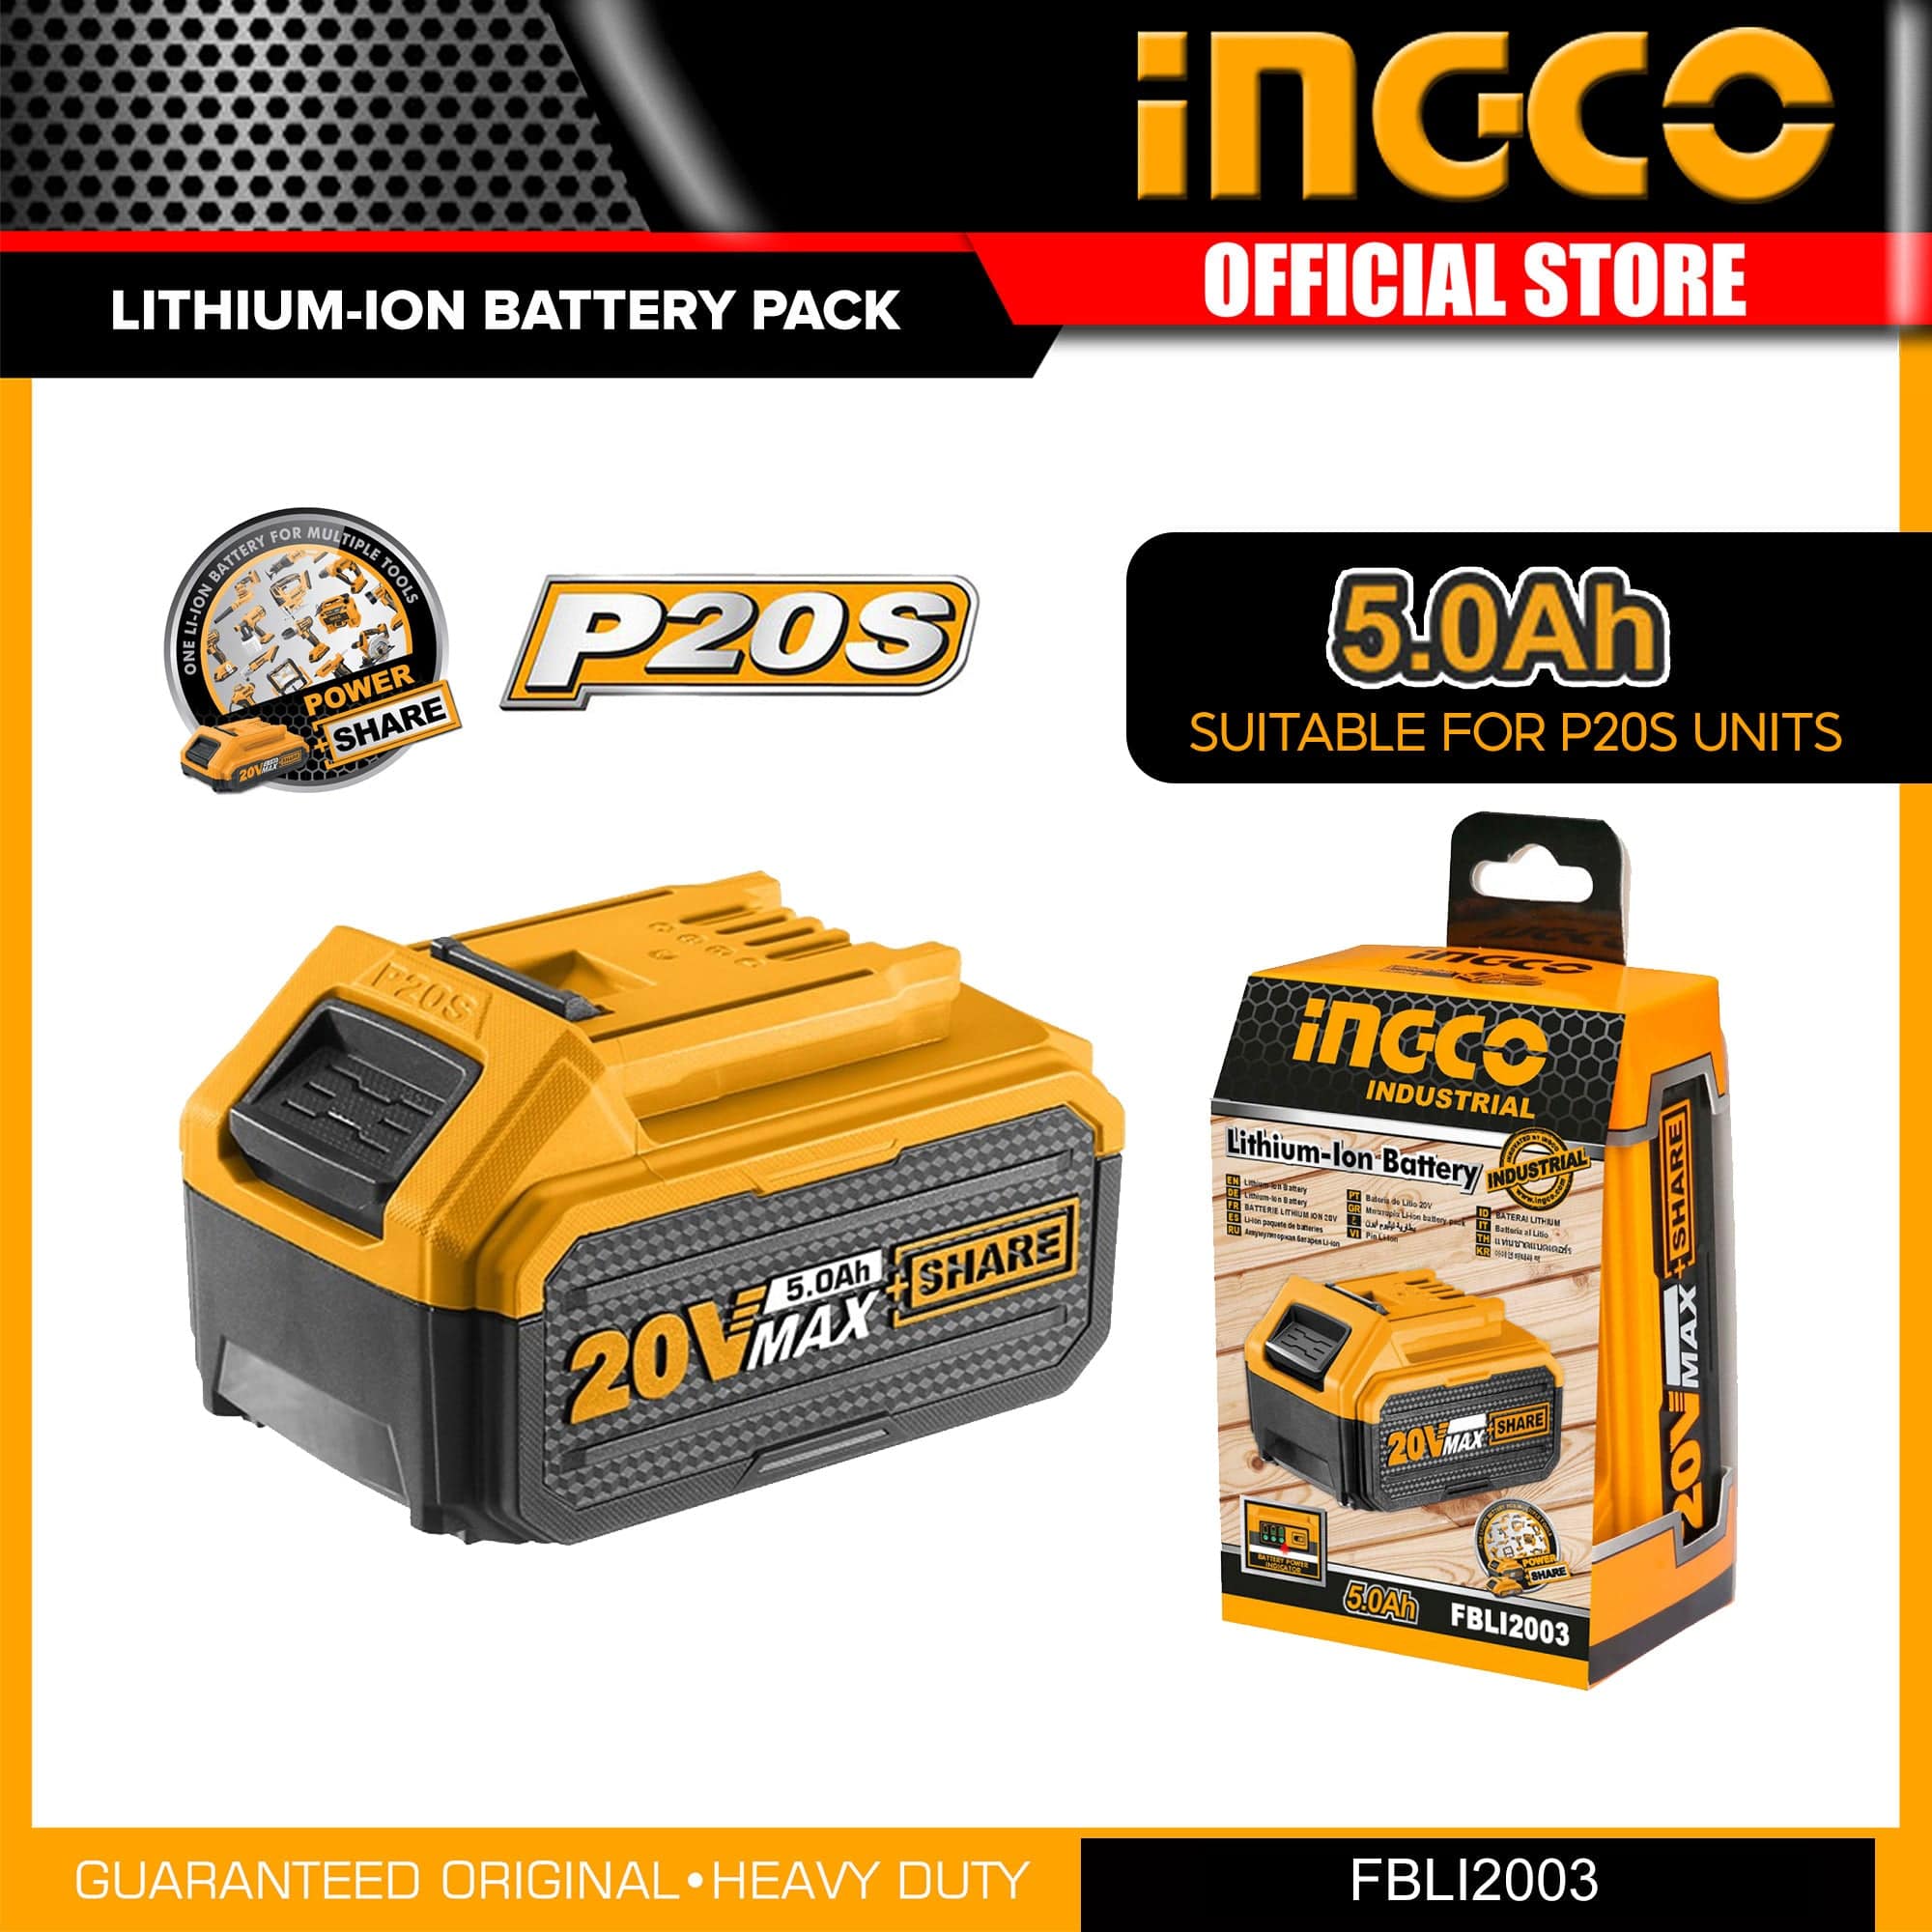 Ingco 20V 5.0Ah Lithium-Ion Battery Pack - FBLI2003 | Supply Master | Accra, Ghana Batteries & Chargers Buy Tools hardware Building materials